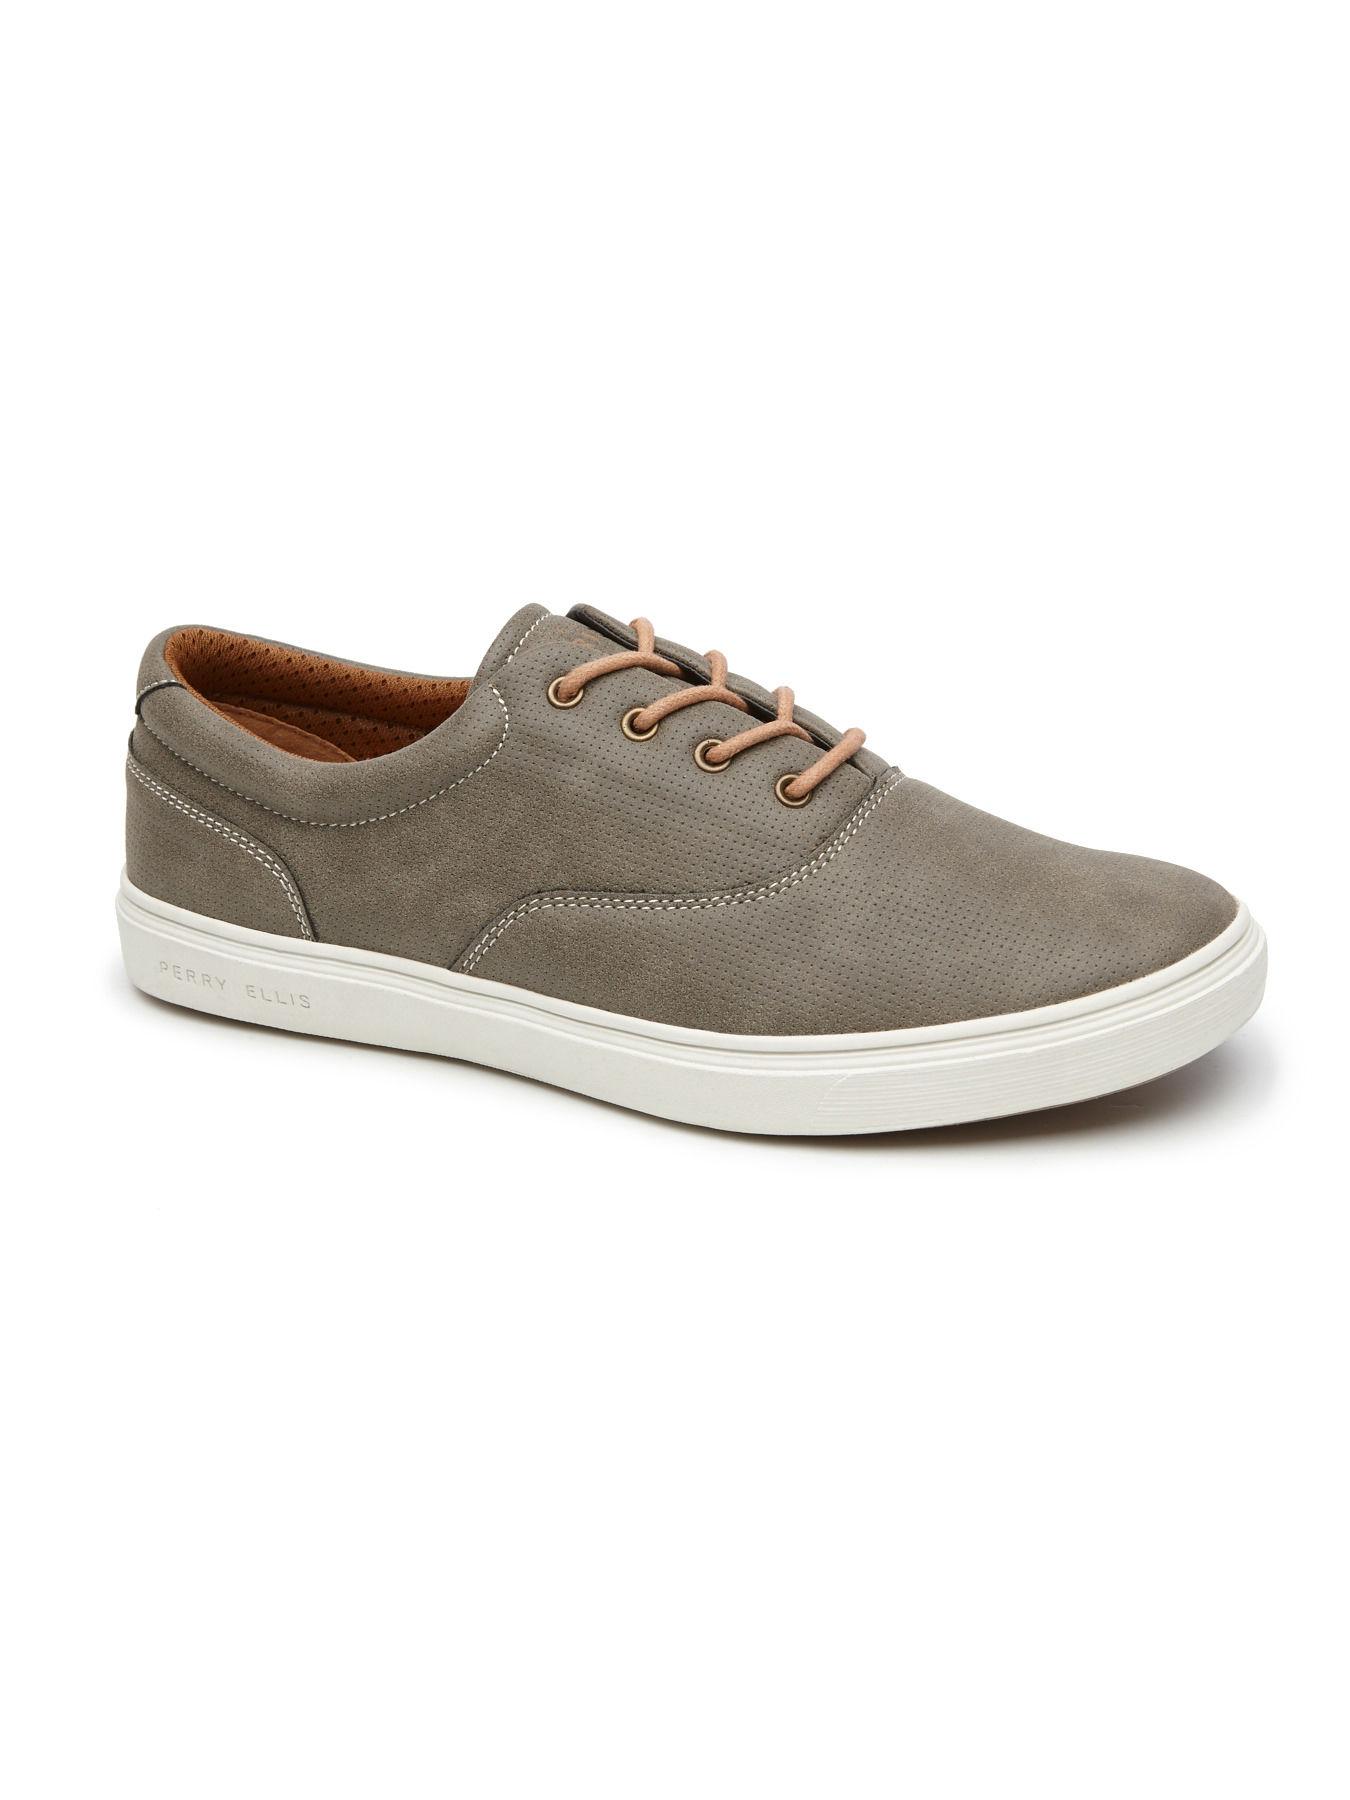 Perry ellis Williams Lace Up Sneaker in Gray for Men | Lyst